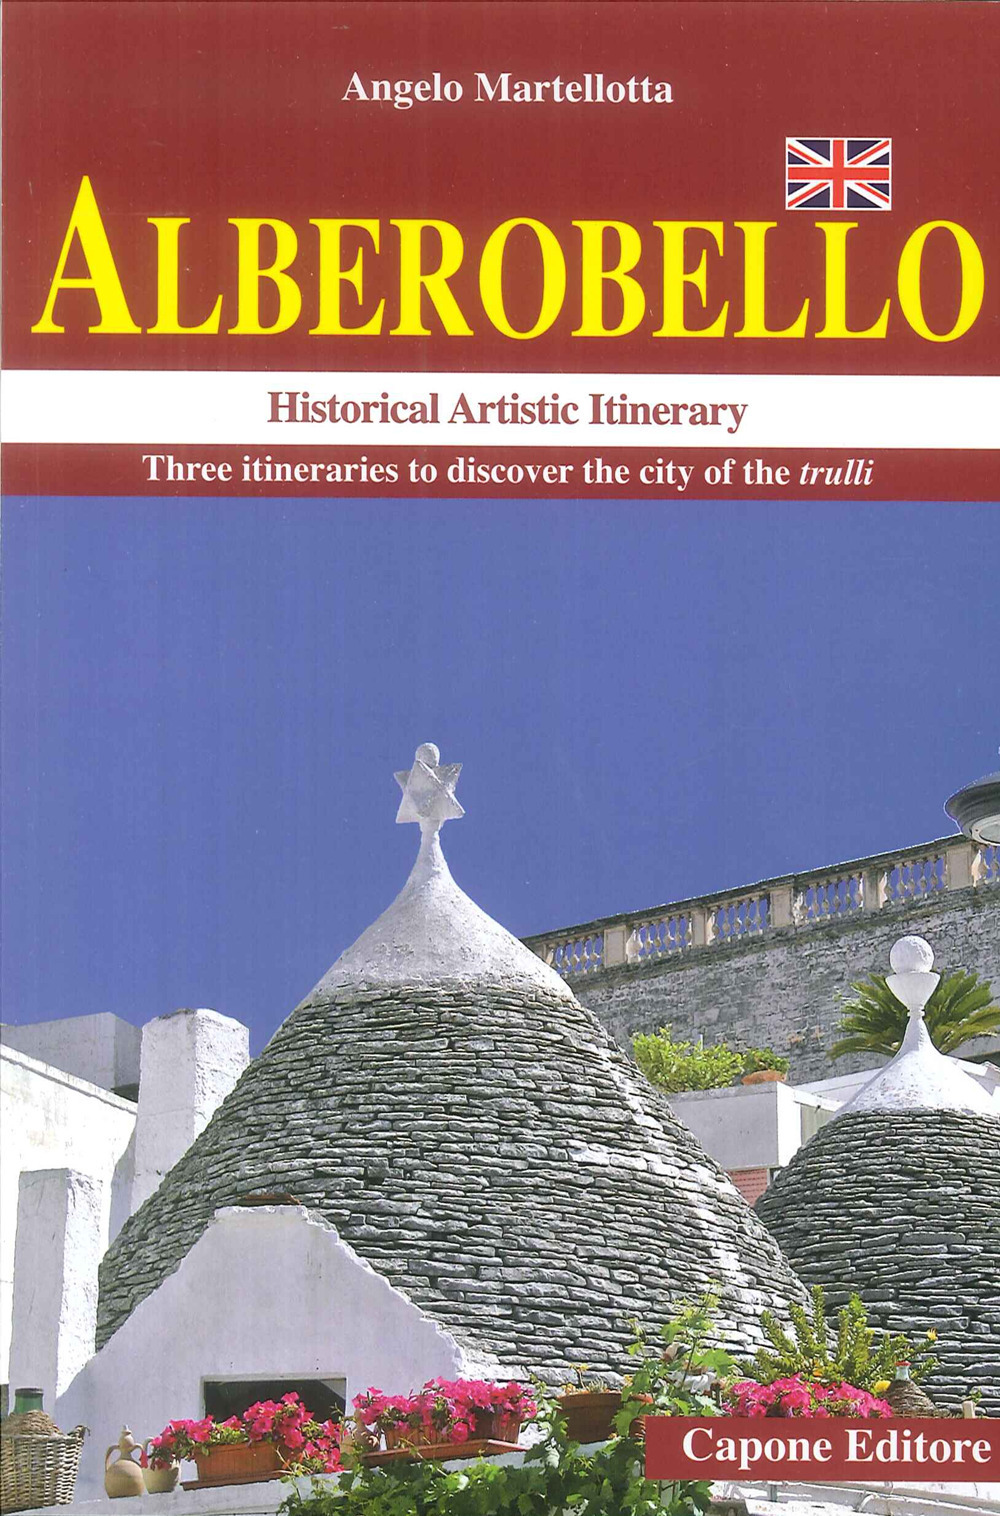 Alberobello. Historical artistic itinerary. Three itineraries to discover the city of the trulli